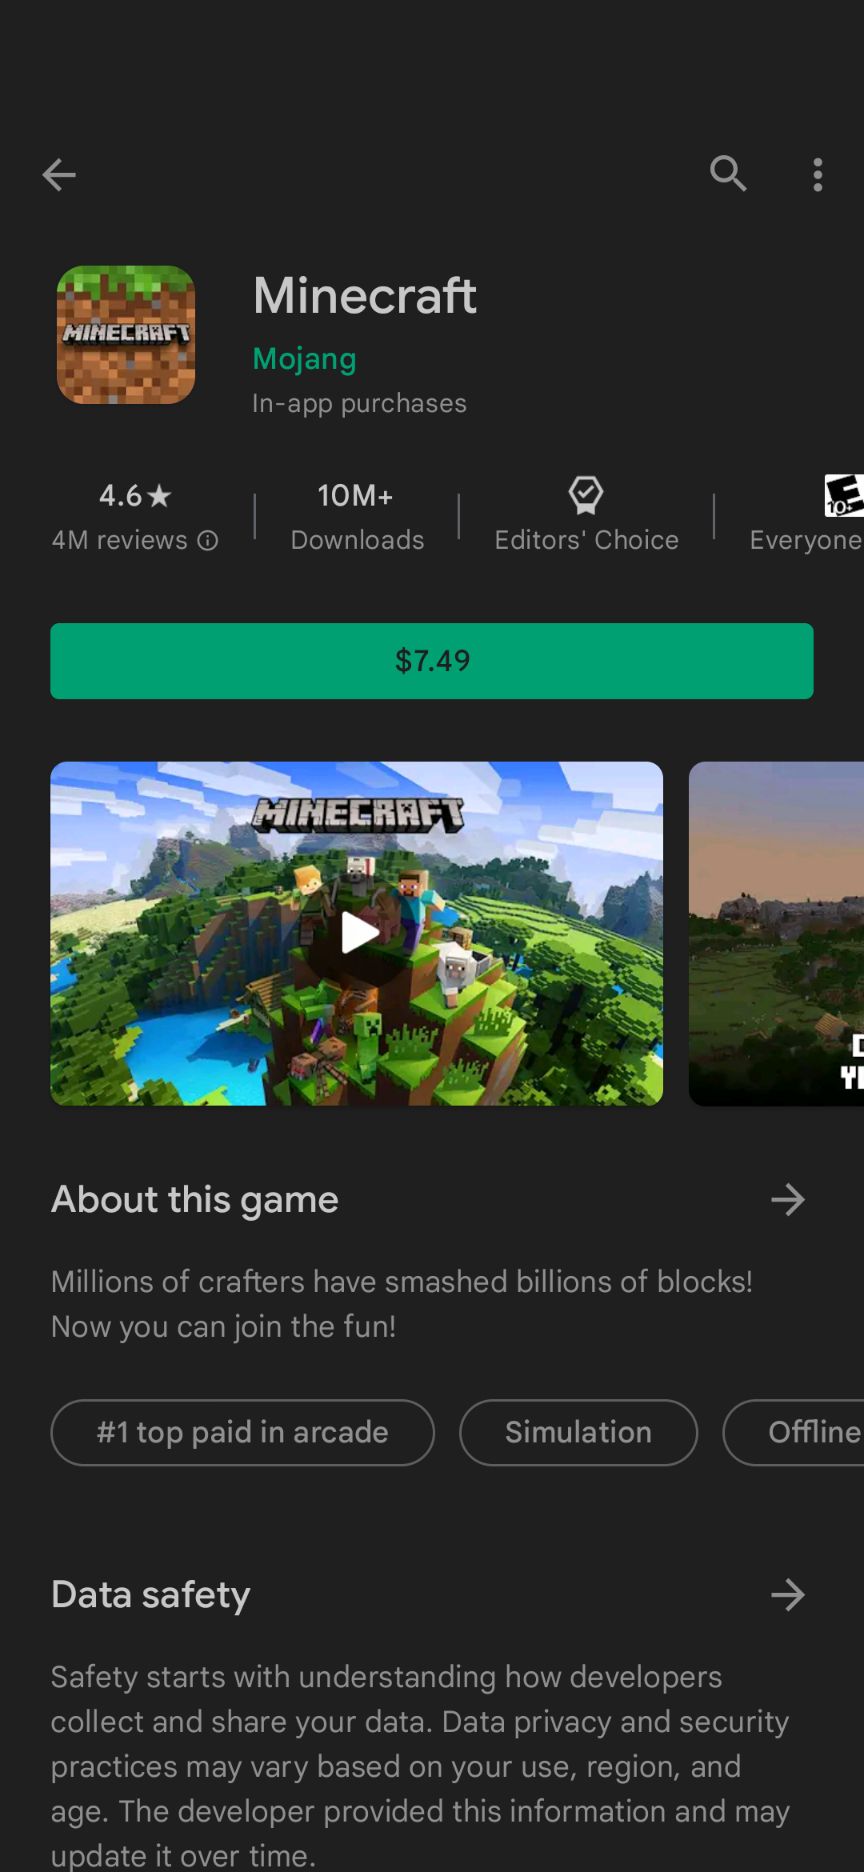 The Google Play Store app's Minecraft game listing.